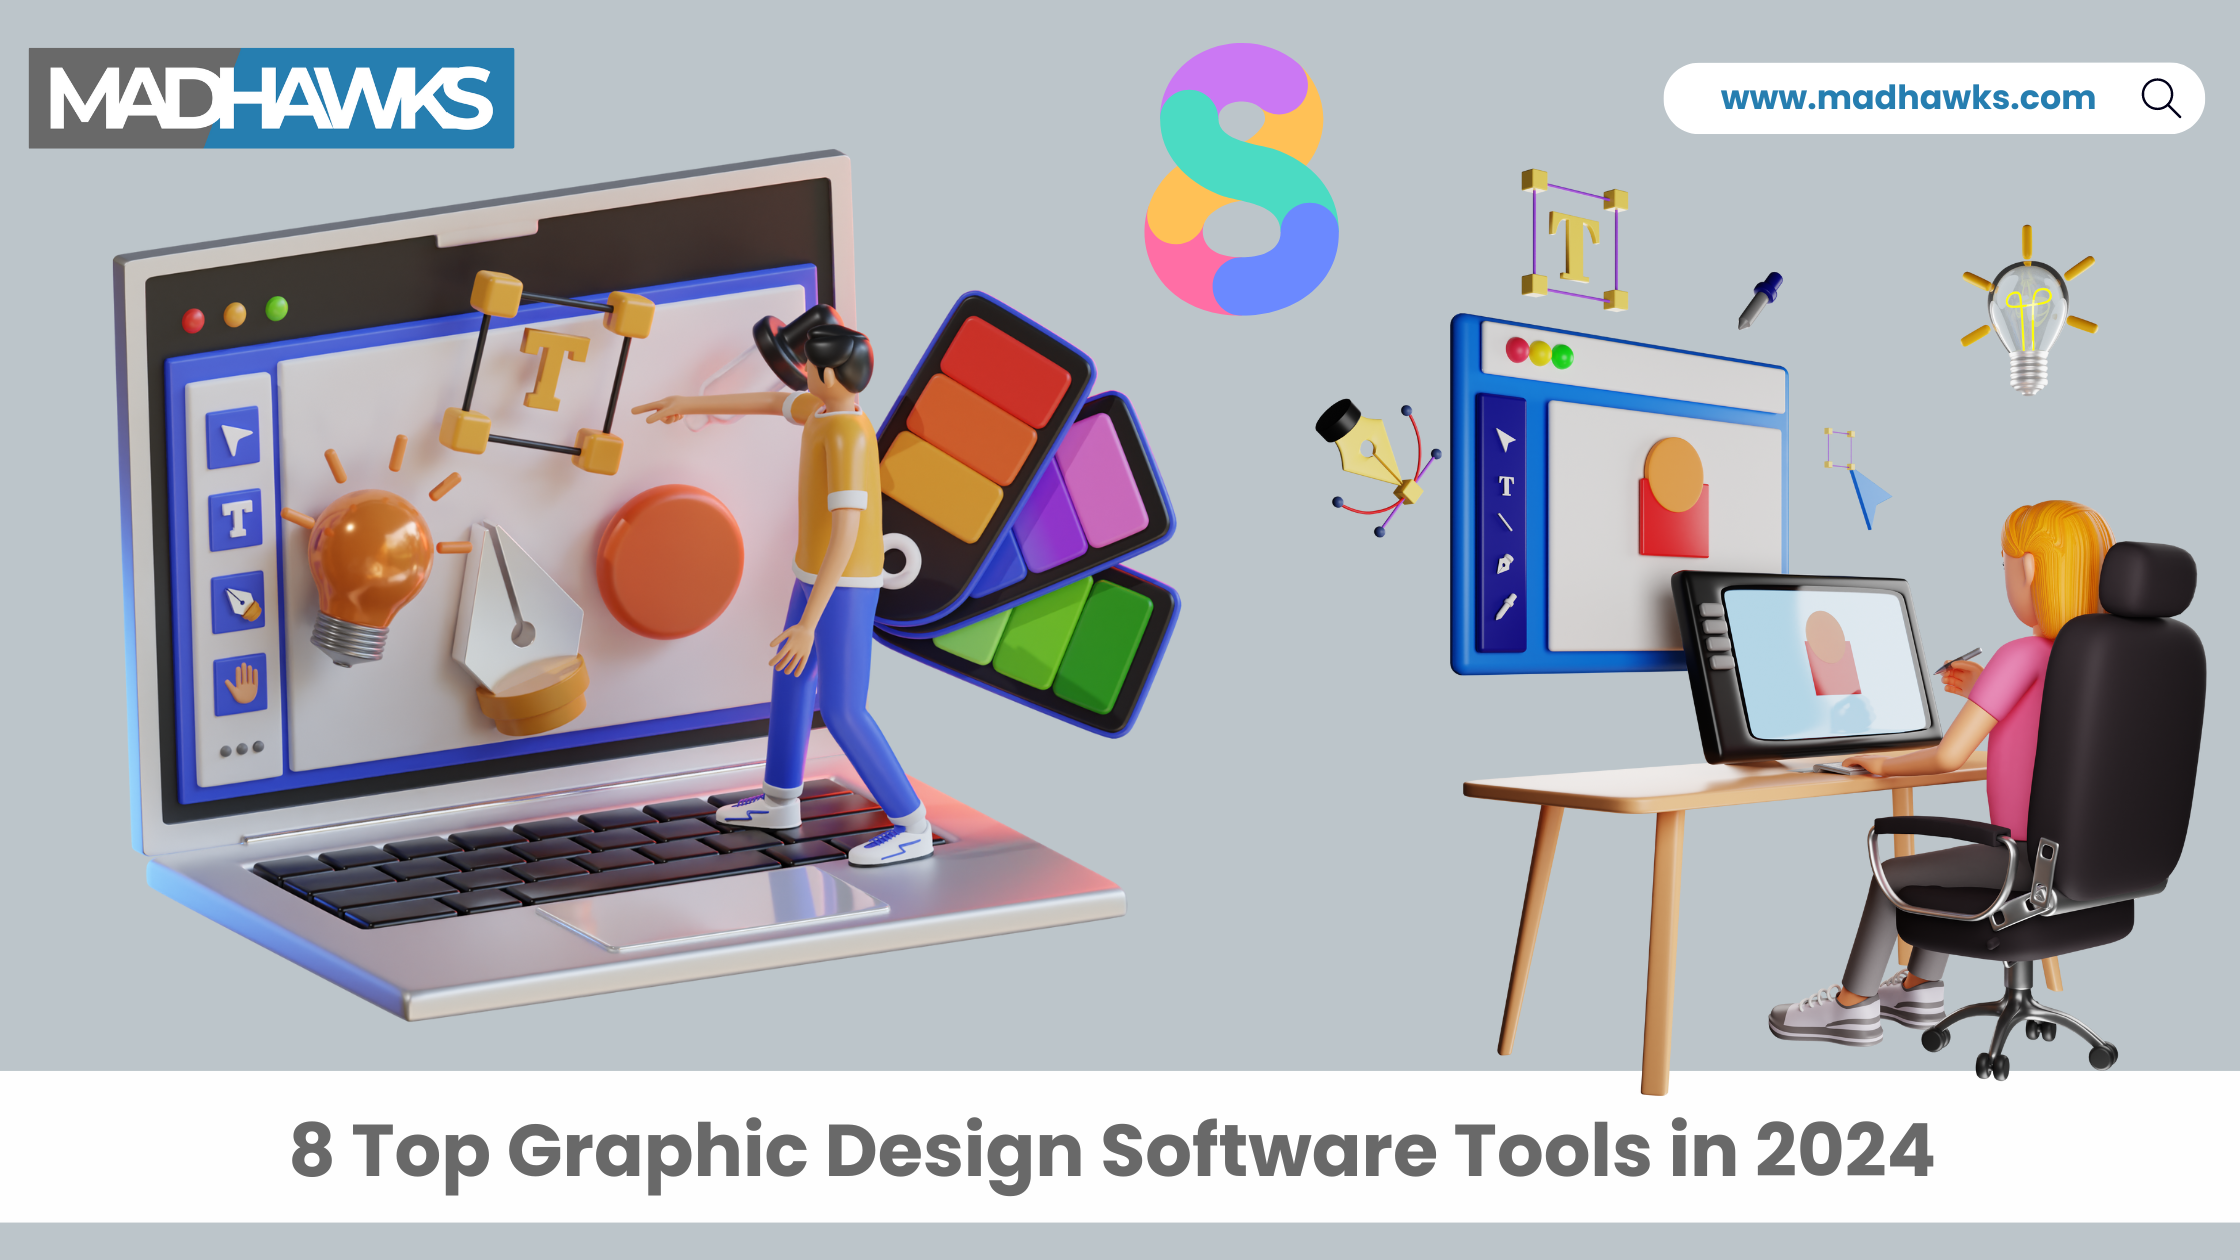 8 Top Graphic Design Software Tools in 2024